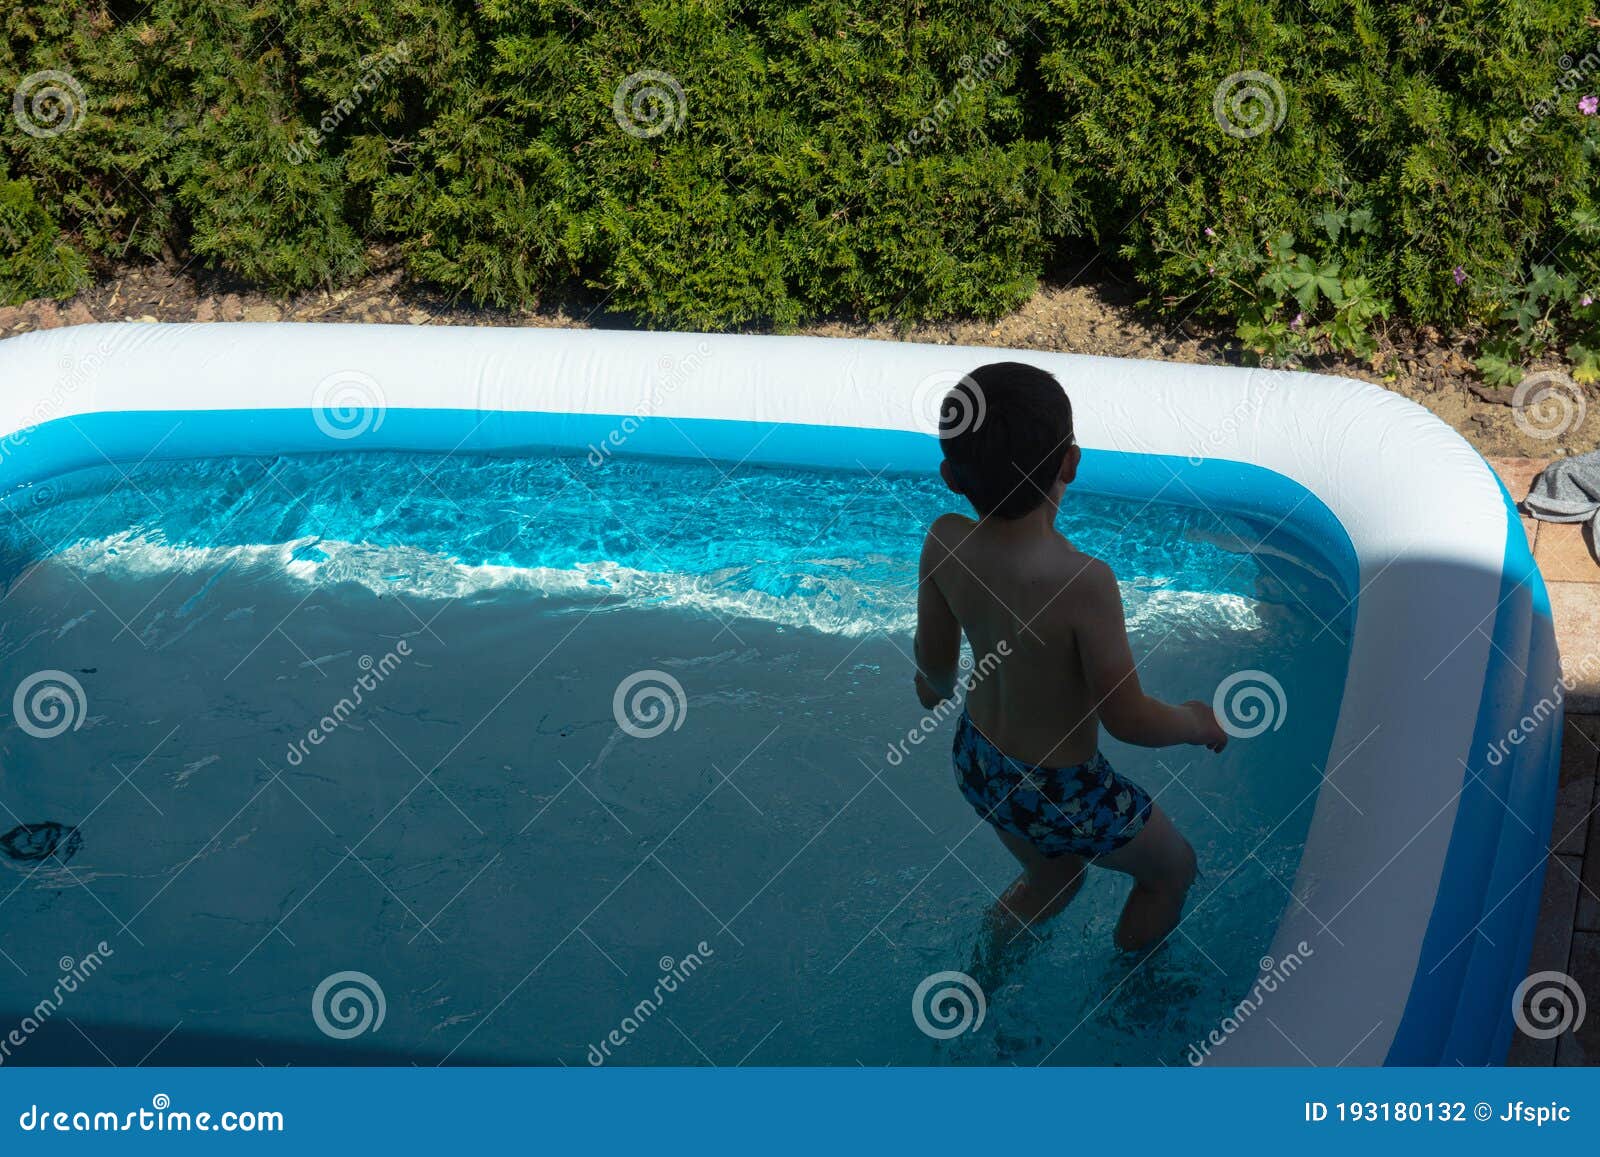 little child swimming in pool